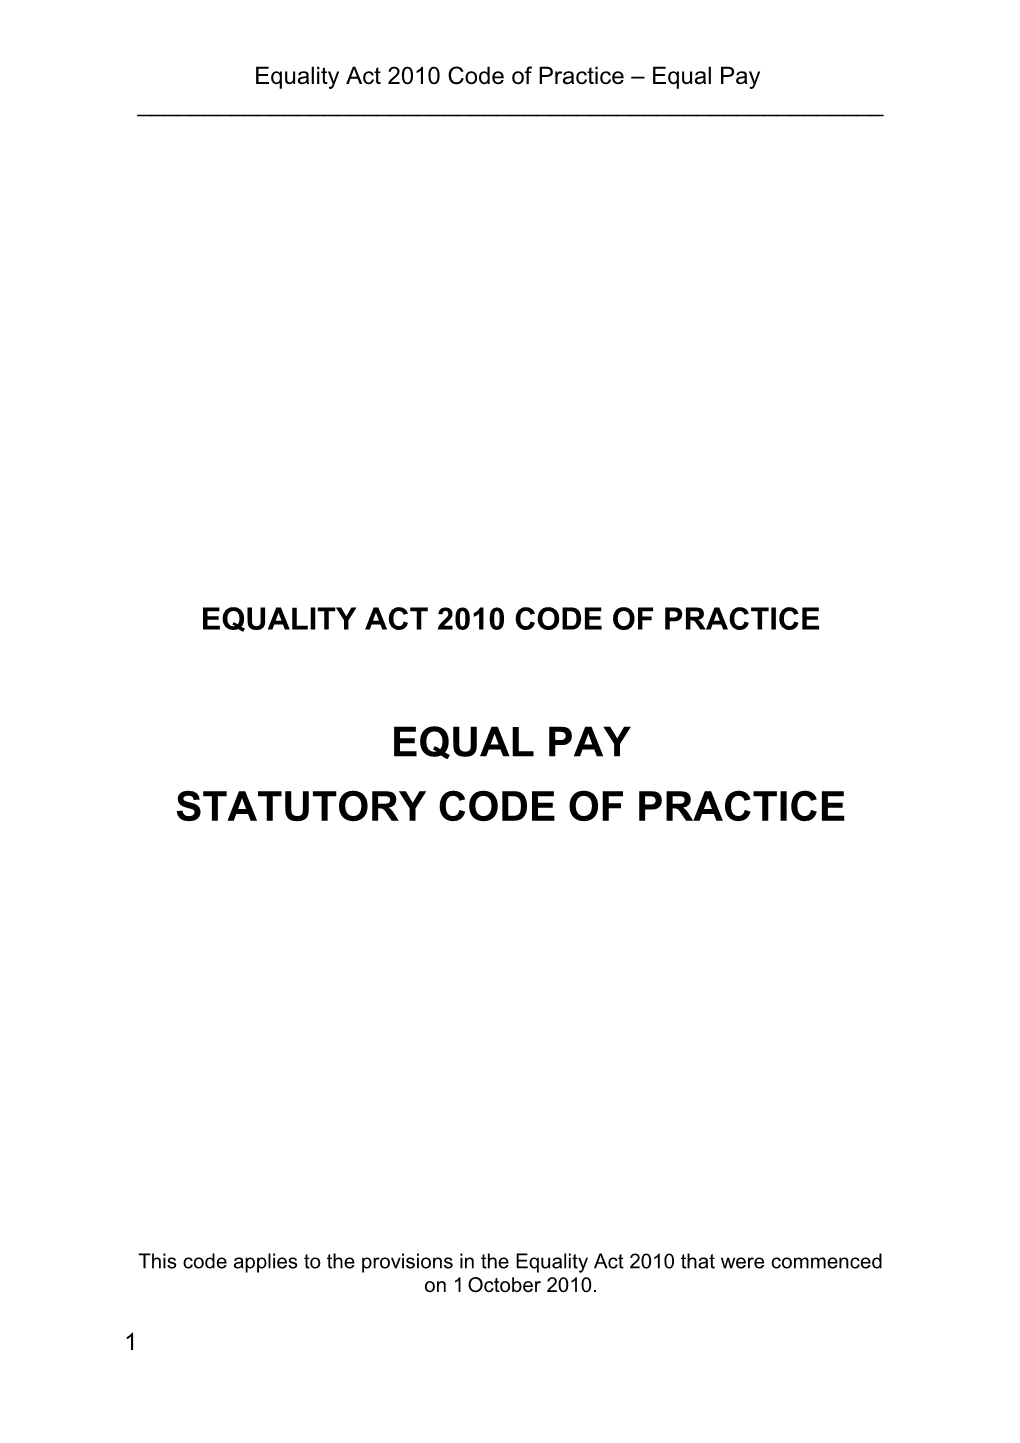 Equality Act 2010 Code of Practice Equal Pay